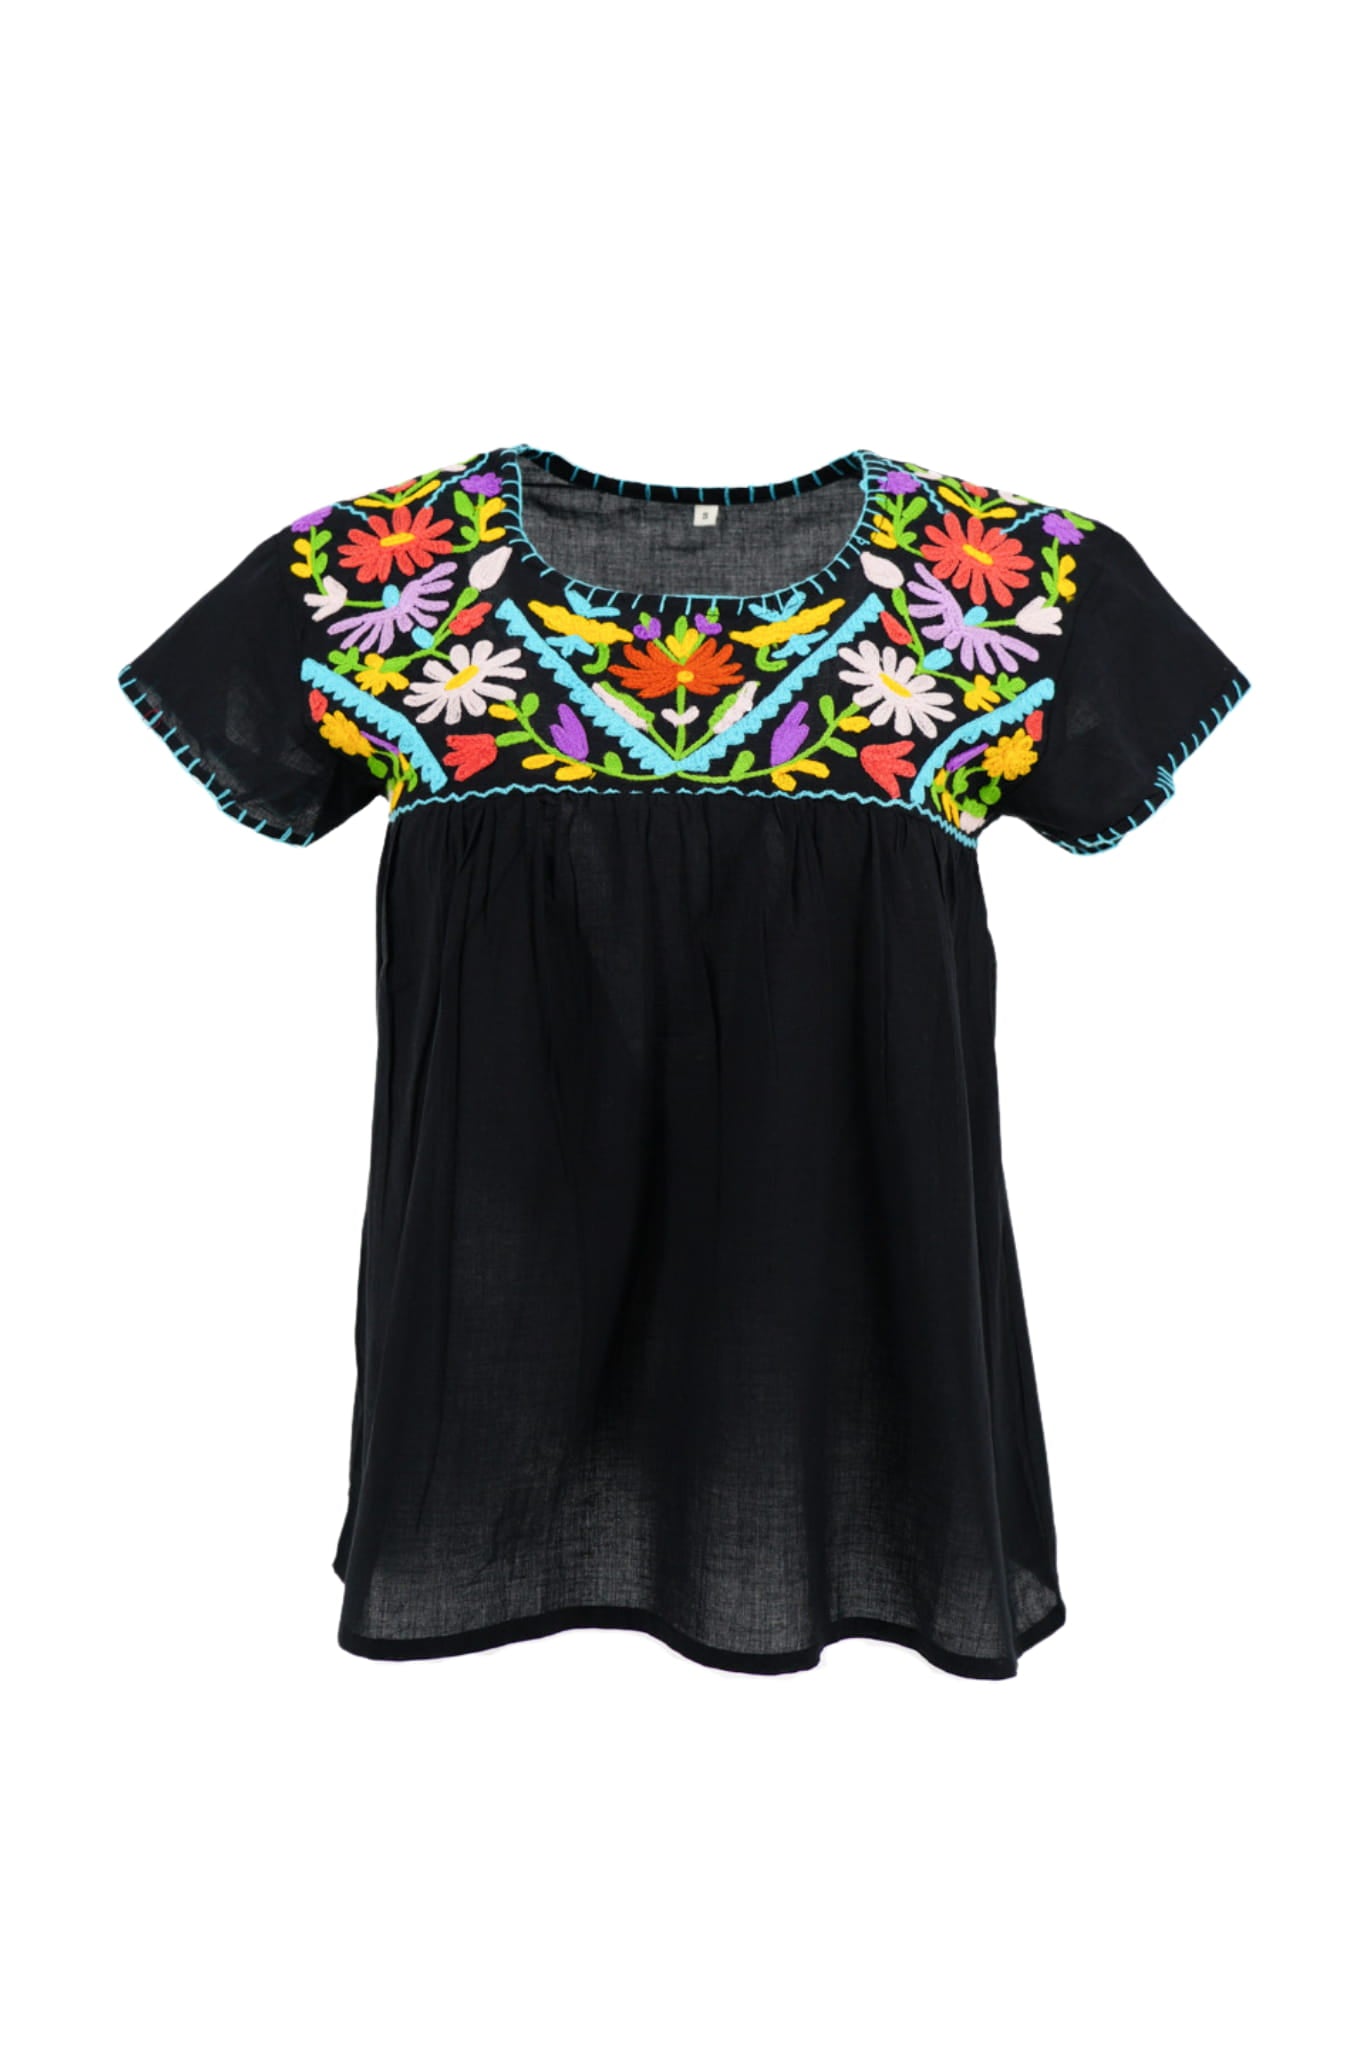 black embroidered shirt front